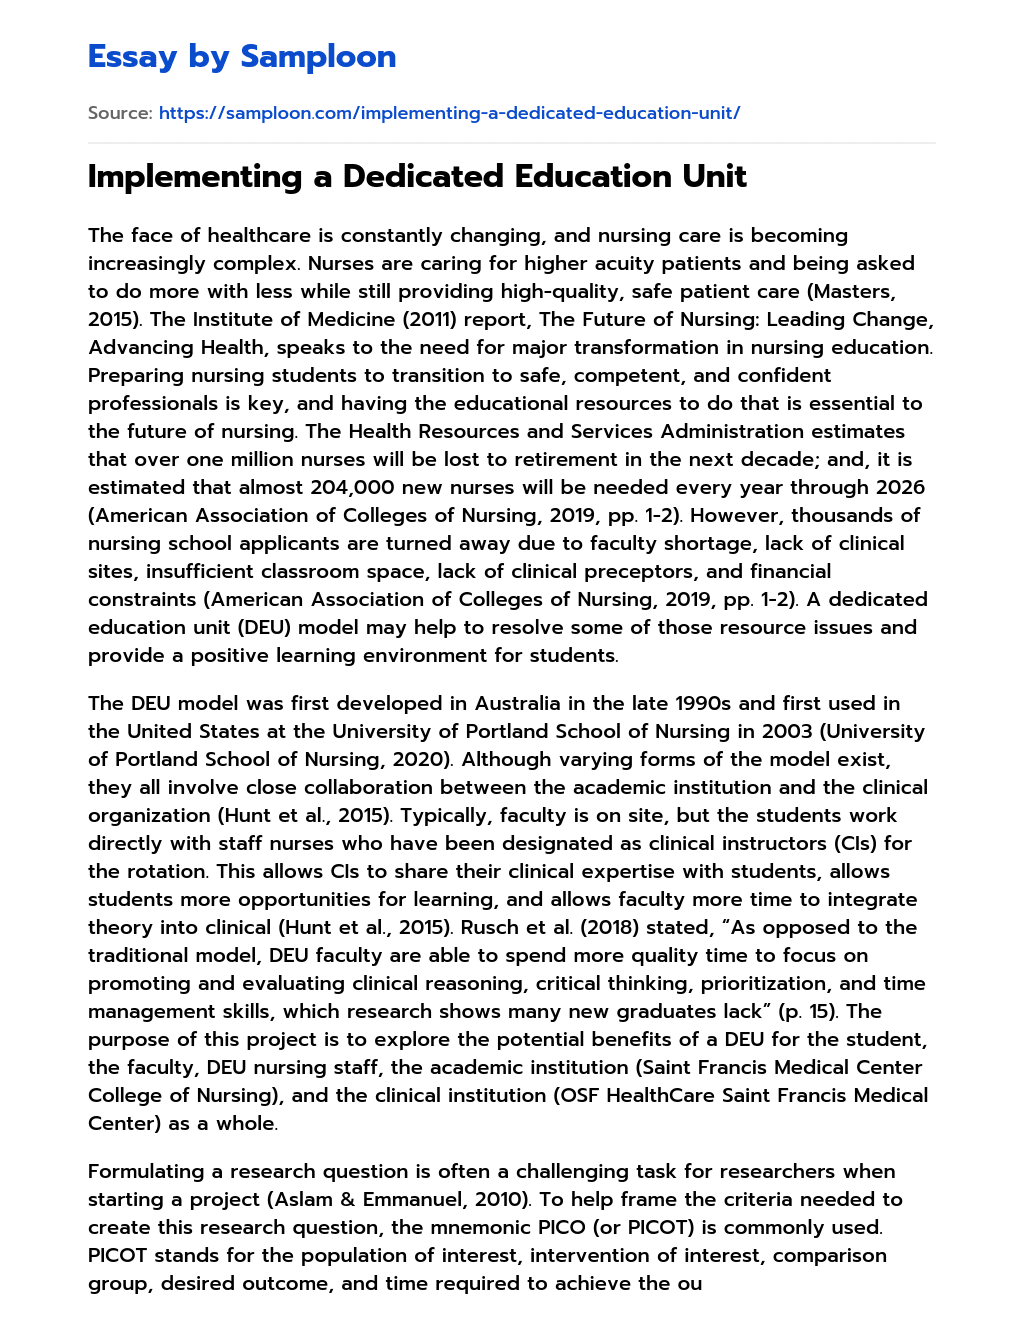 Implementing a Dedicated Education Unit essay